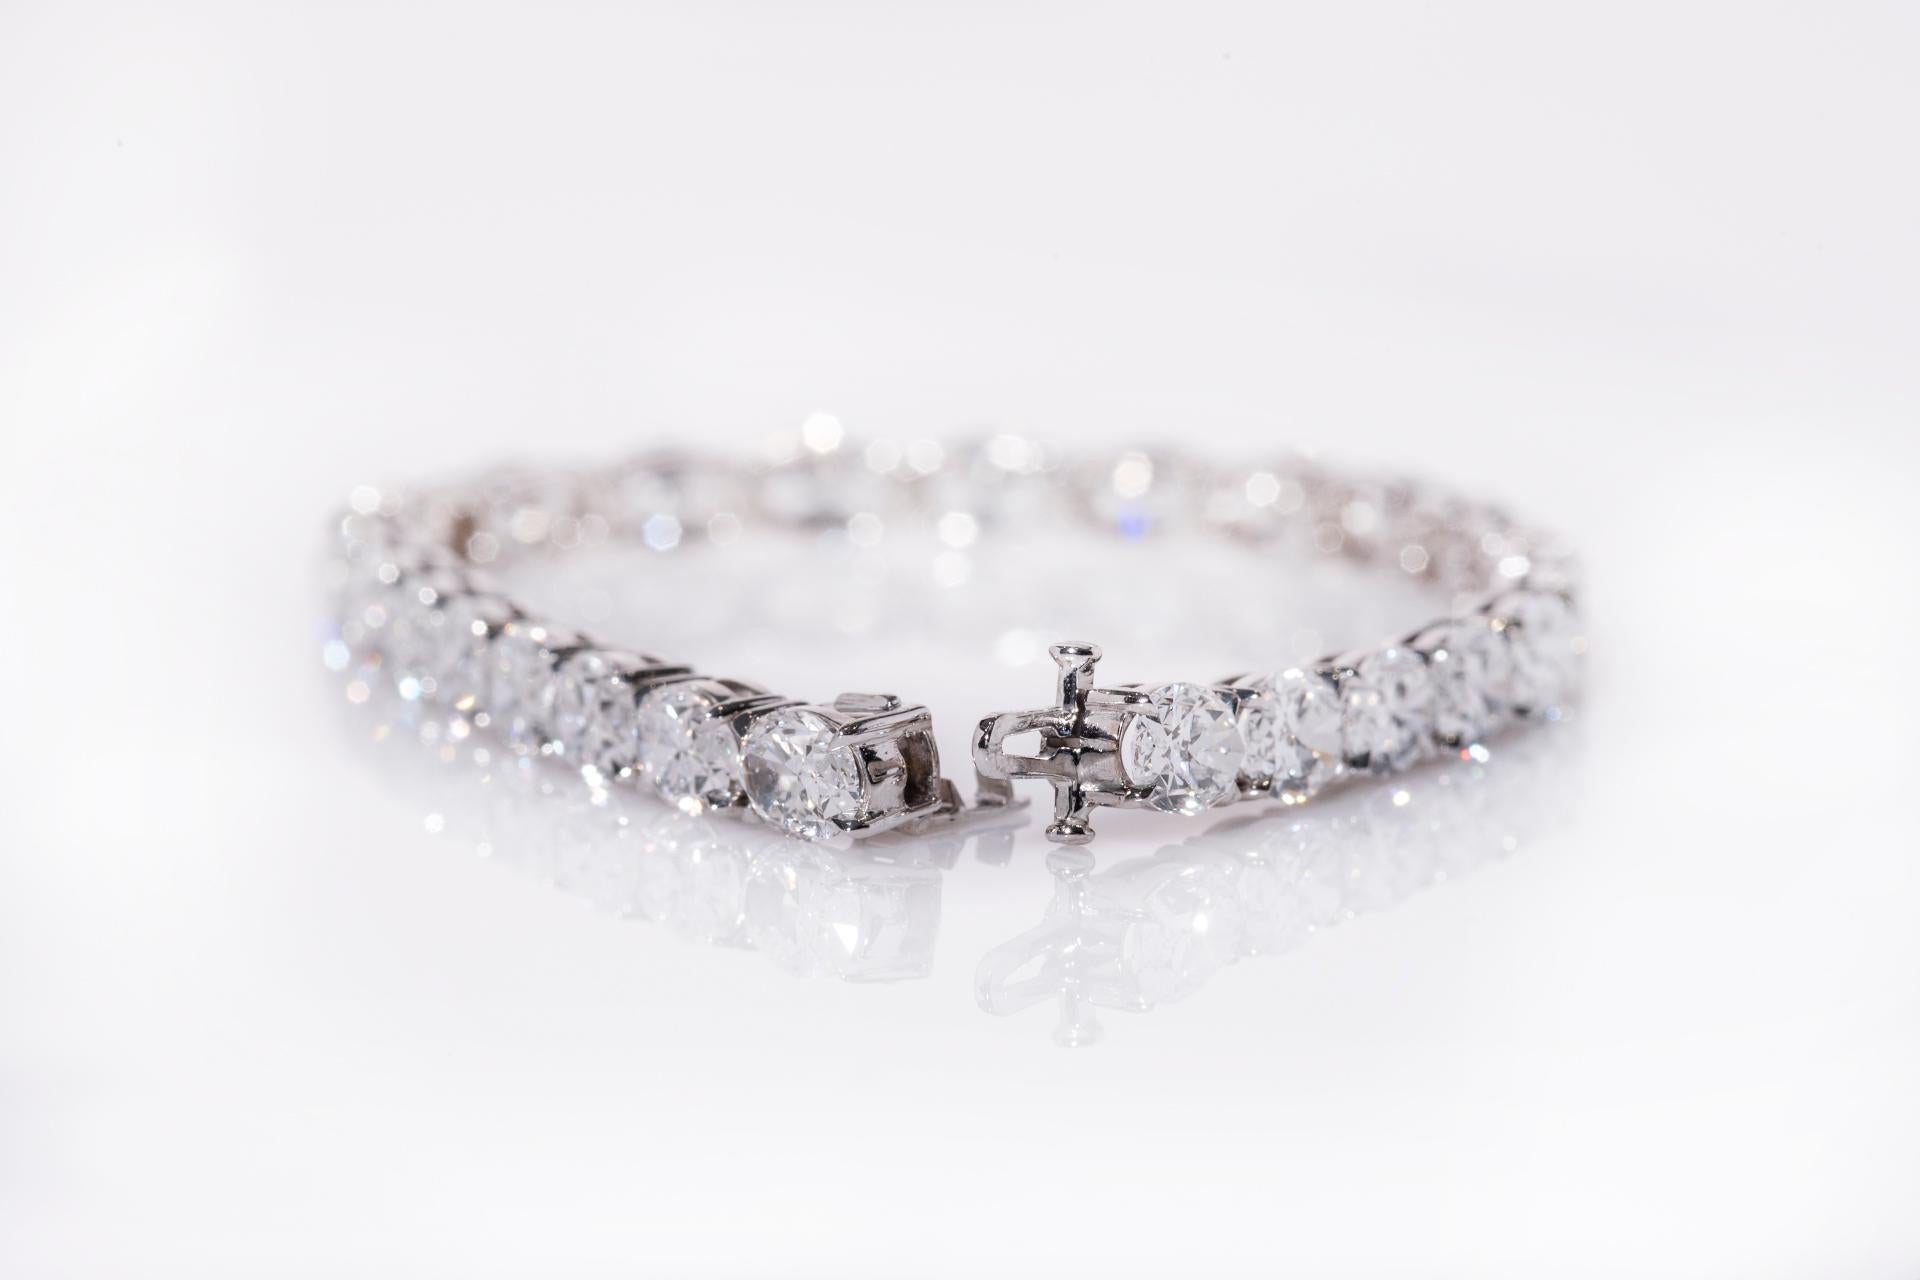 18k handmade tennis bracelet set with GIA certified diamonds E-F color and VS2-SI1 clarity.